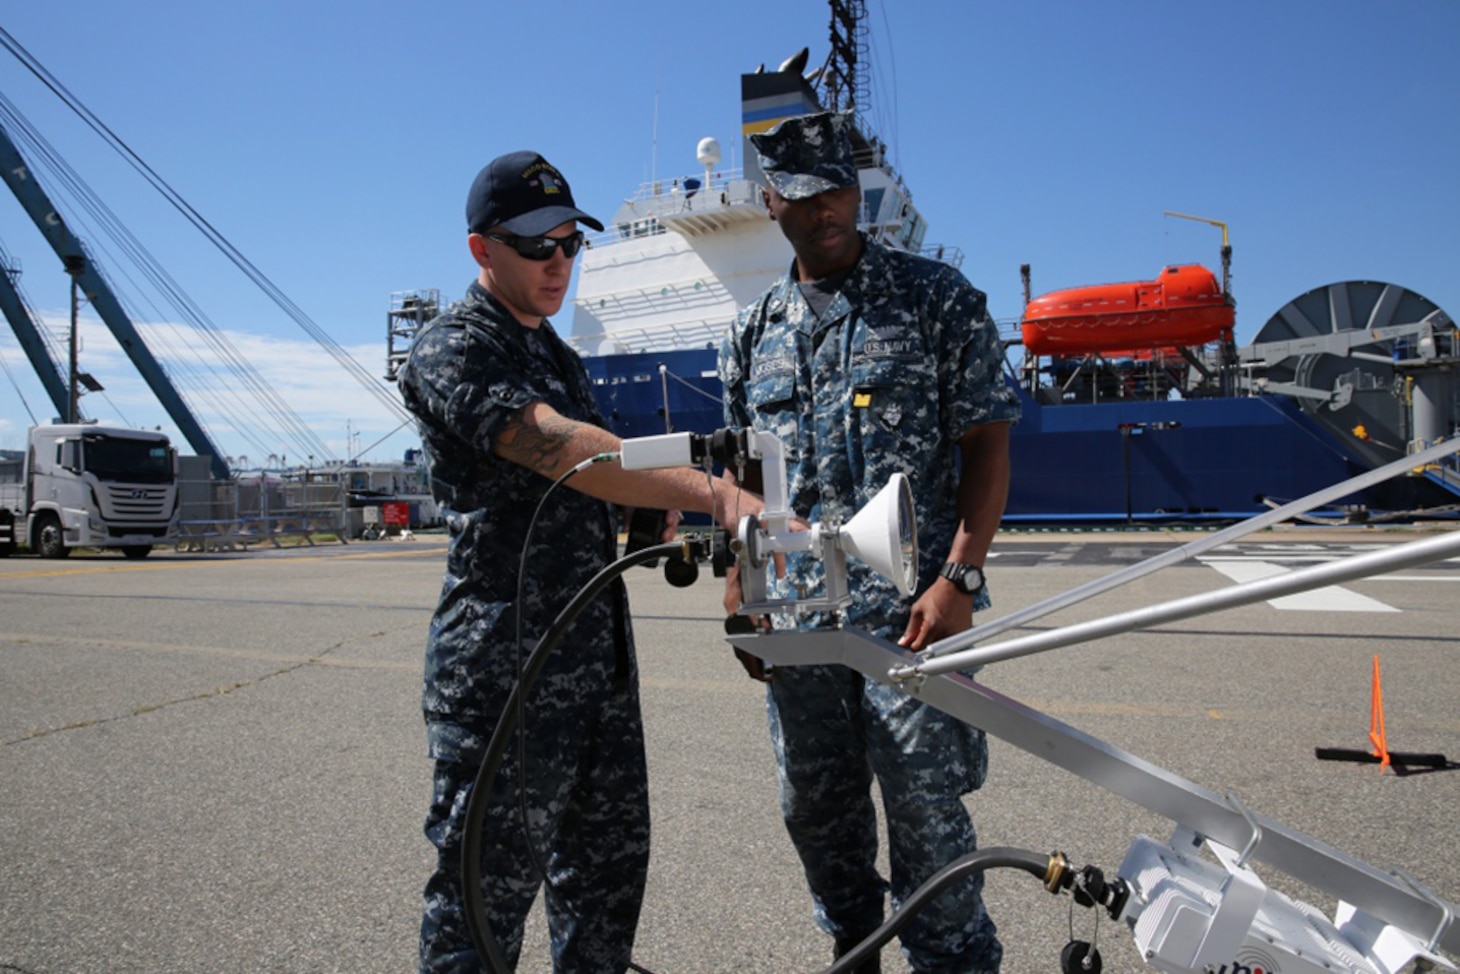 Information Systems Technician 2nd Class Dylan Simons (left) and Yeoman 2nd Class Sir Joseph Moses, both with Reserve Unit Expeditionary Port Unit 115, out of Honolulu, examine a satellite dish at Pier 8 here, Aug. 24.